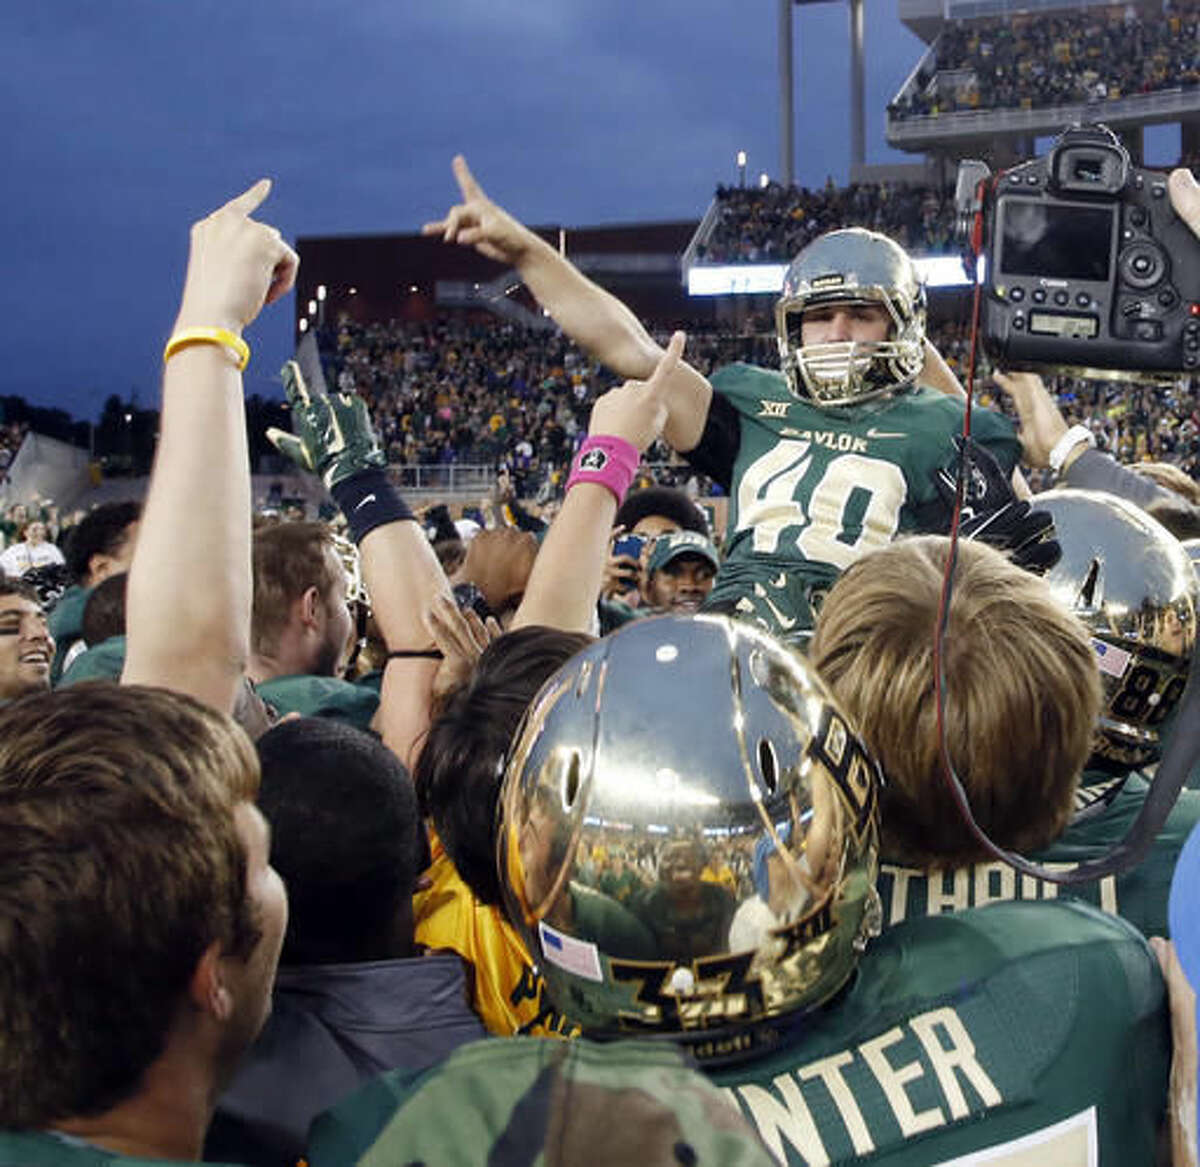 FILE - In this Oct. 11, 2014, file photo, Baylor place kicker Chris Callahan (40) is lifted up by the team after connecting for the game-winning field goal against TCU in the second half of an NCAA college football game, in Waco, Texas. Baylor won 61-58. The Baylor-TCU series started in 1899. (Rod Aydelotte/Waco Tribune-Herald via AP, File)